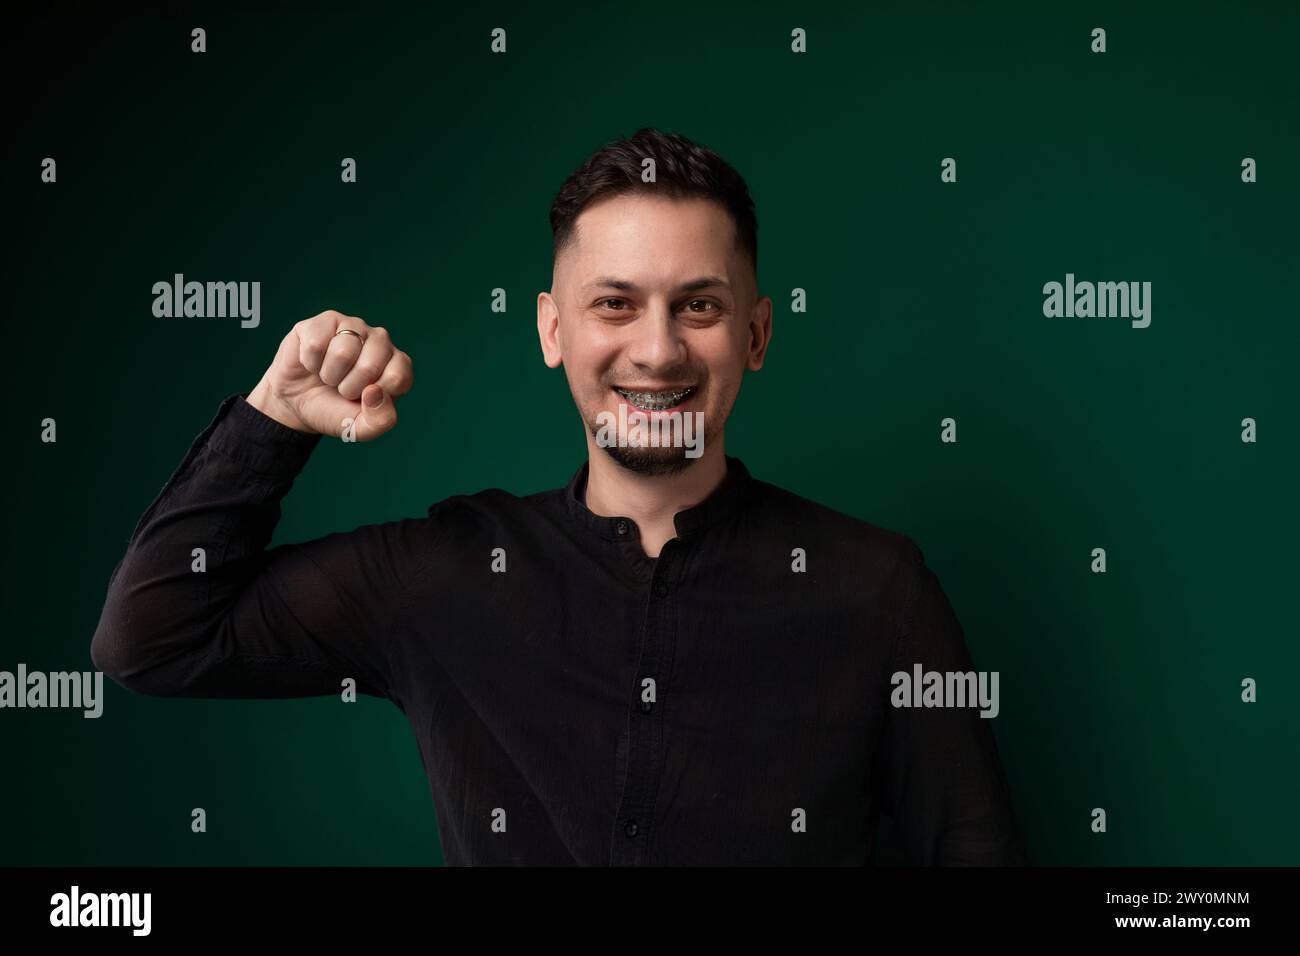 Man in Black Shirt Posing for Picture Stock Photo